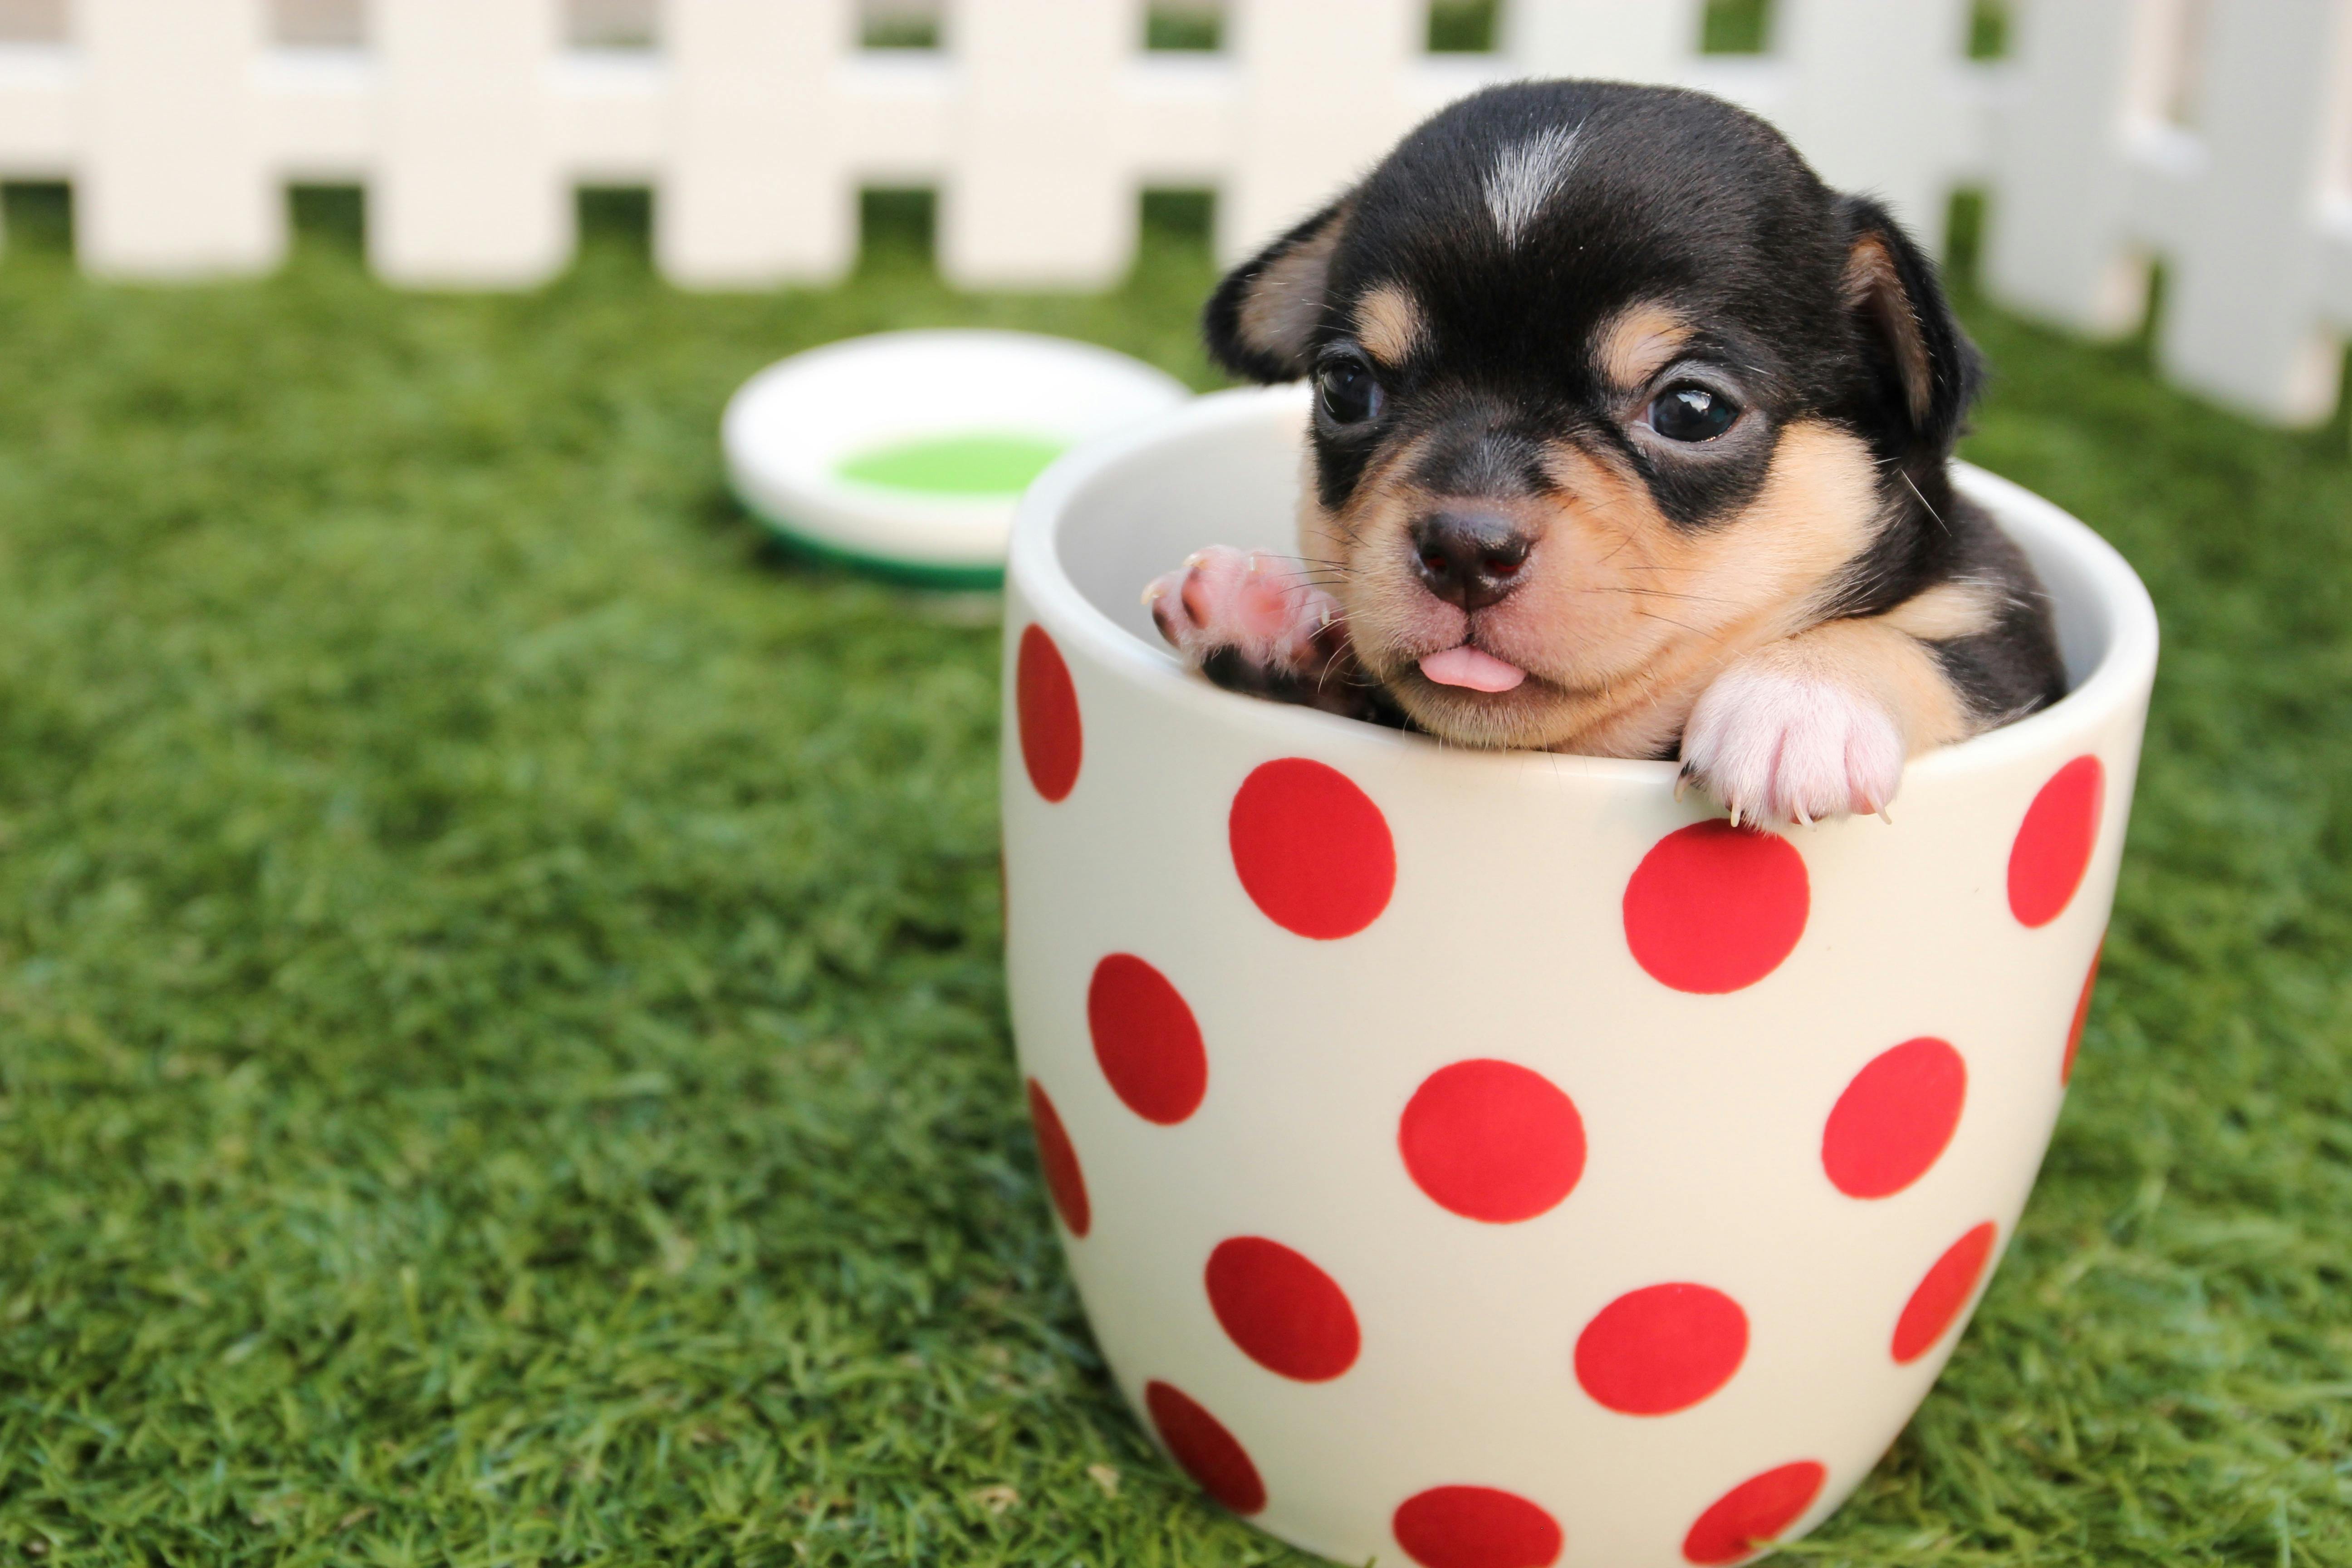 Puppy Photos, Download Free Puppy Stock